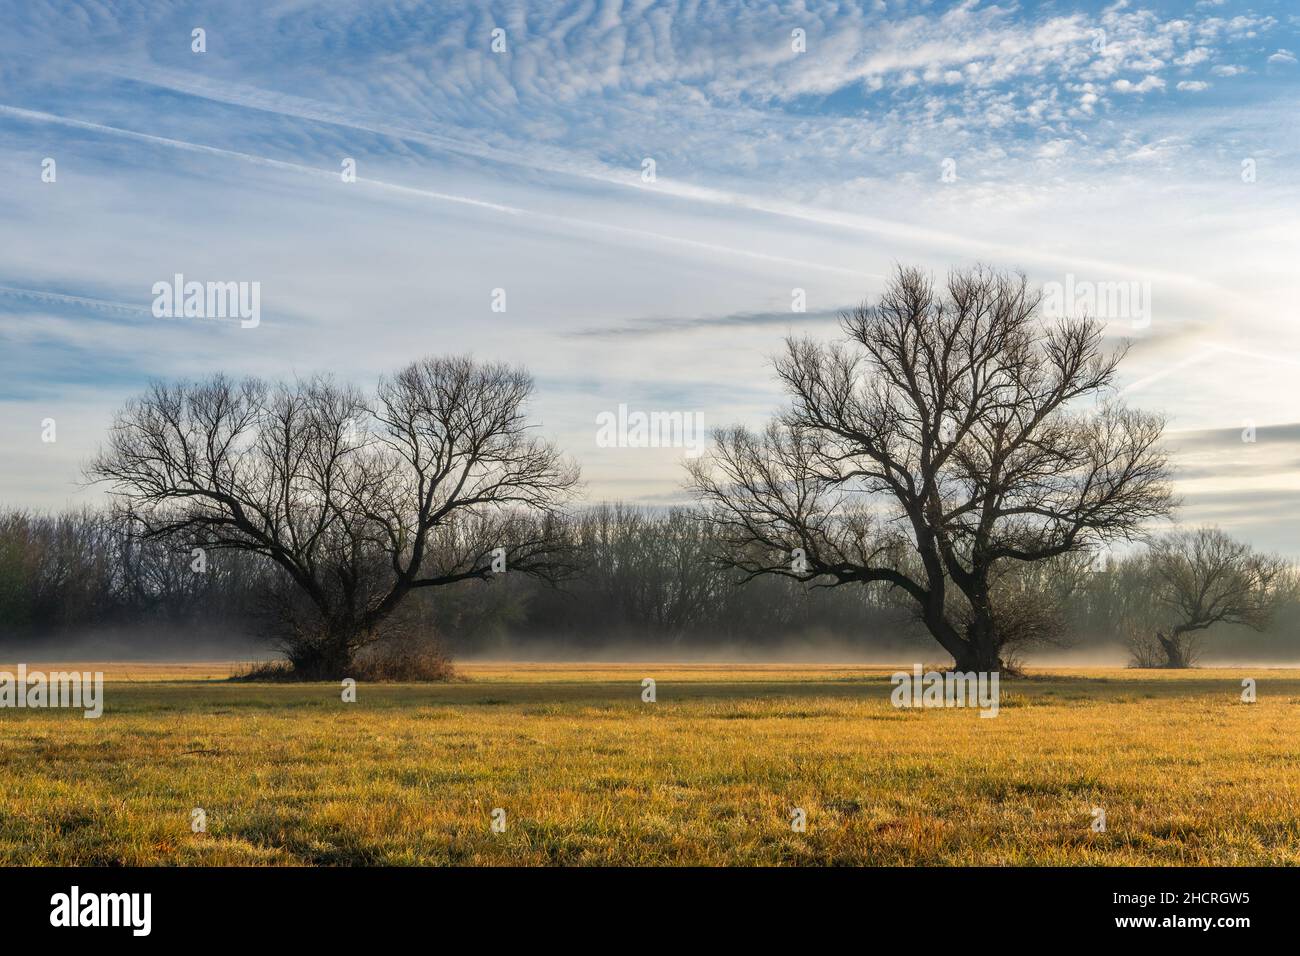 Trees backlit by the Sun on a field at a hazy morning. Stock Photo